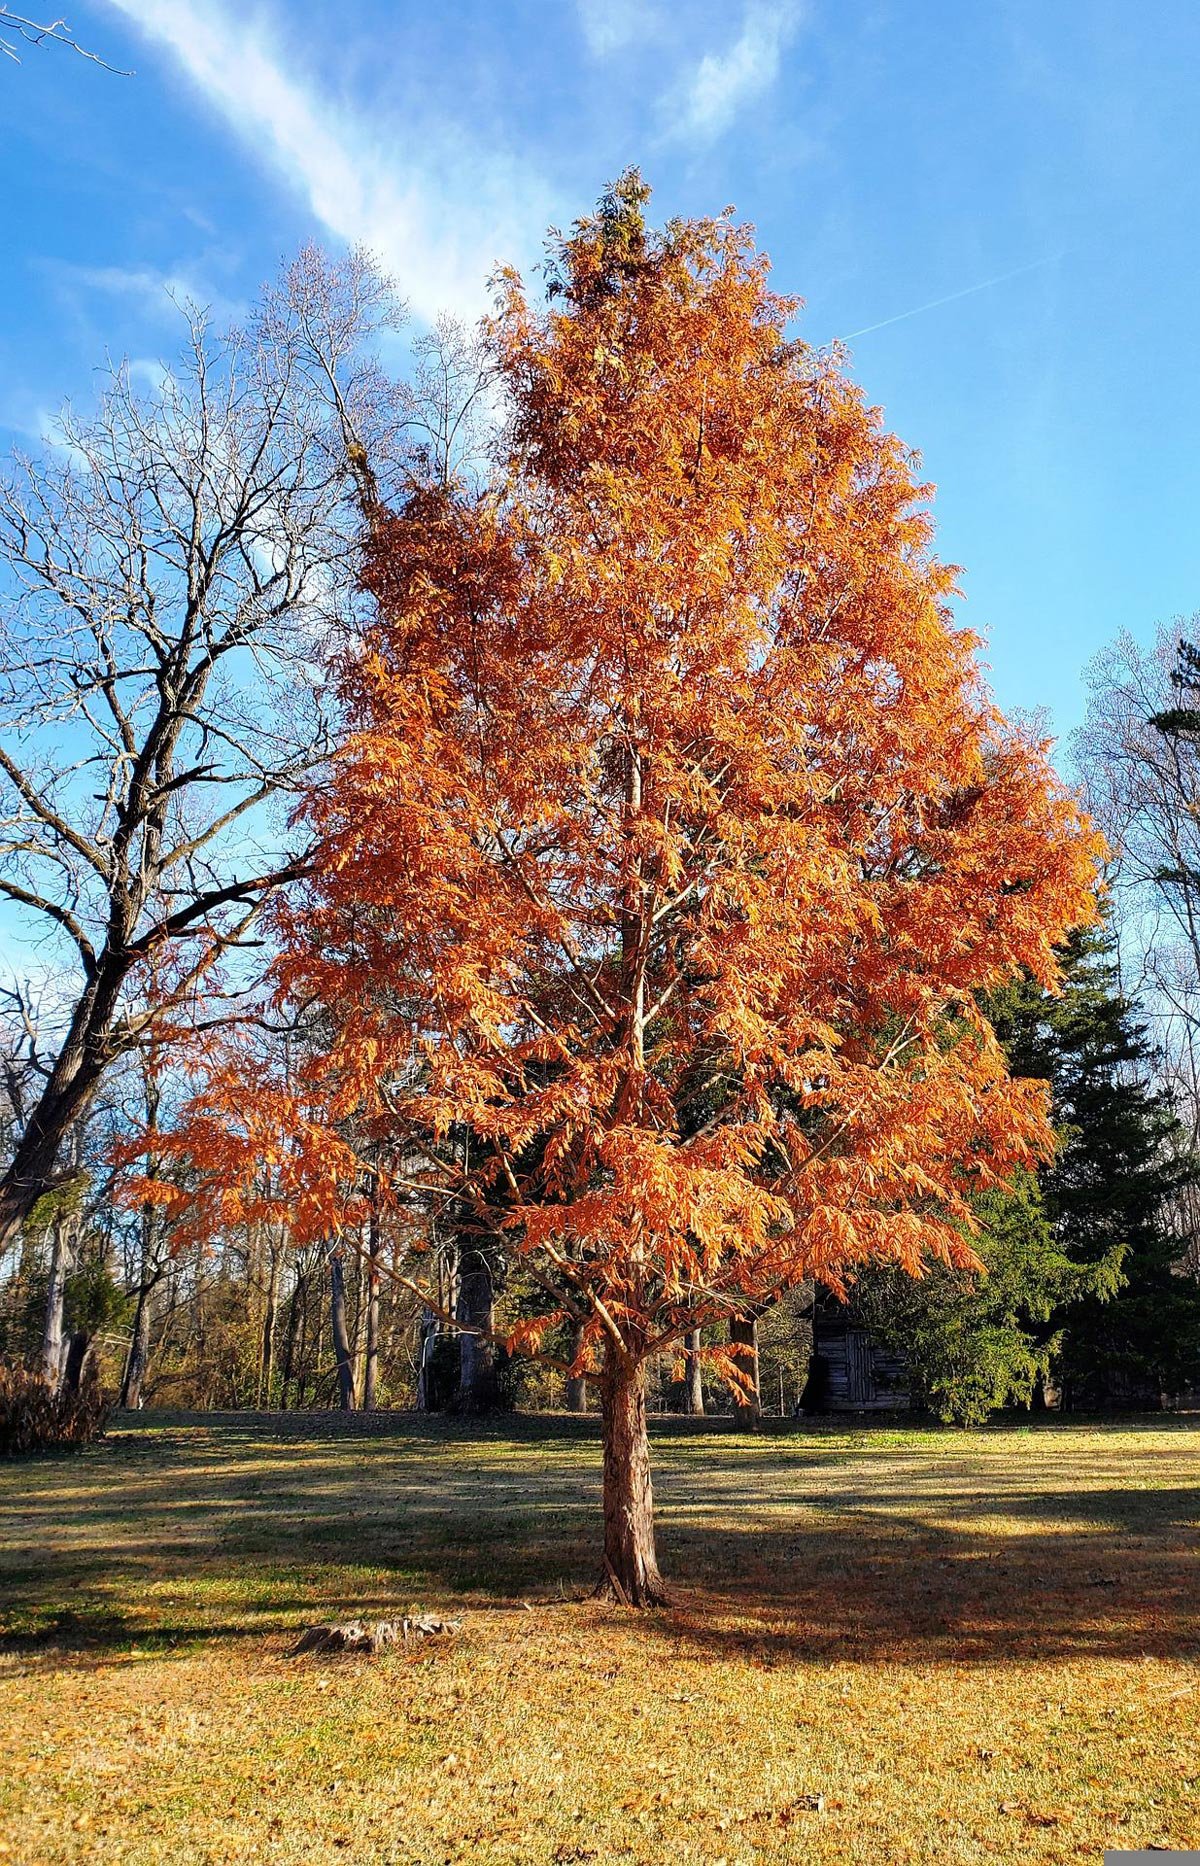 Amber Glow™ Redwood Tree for Sale - Buying & Growing Guide 